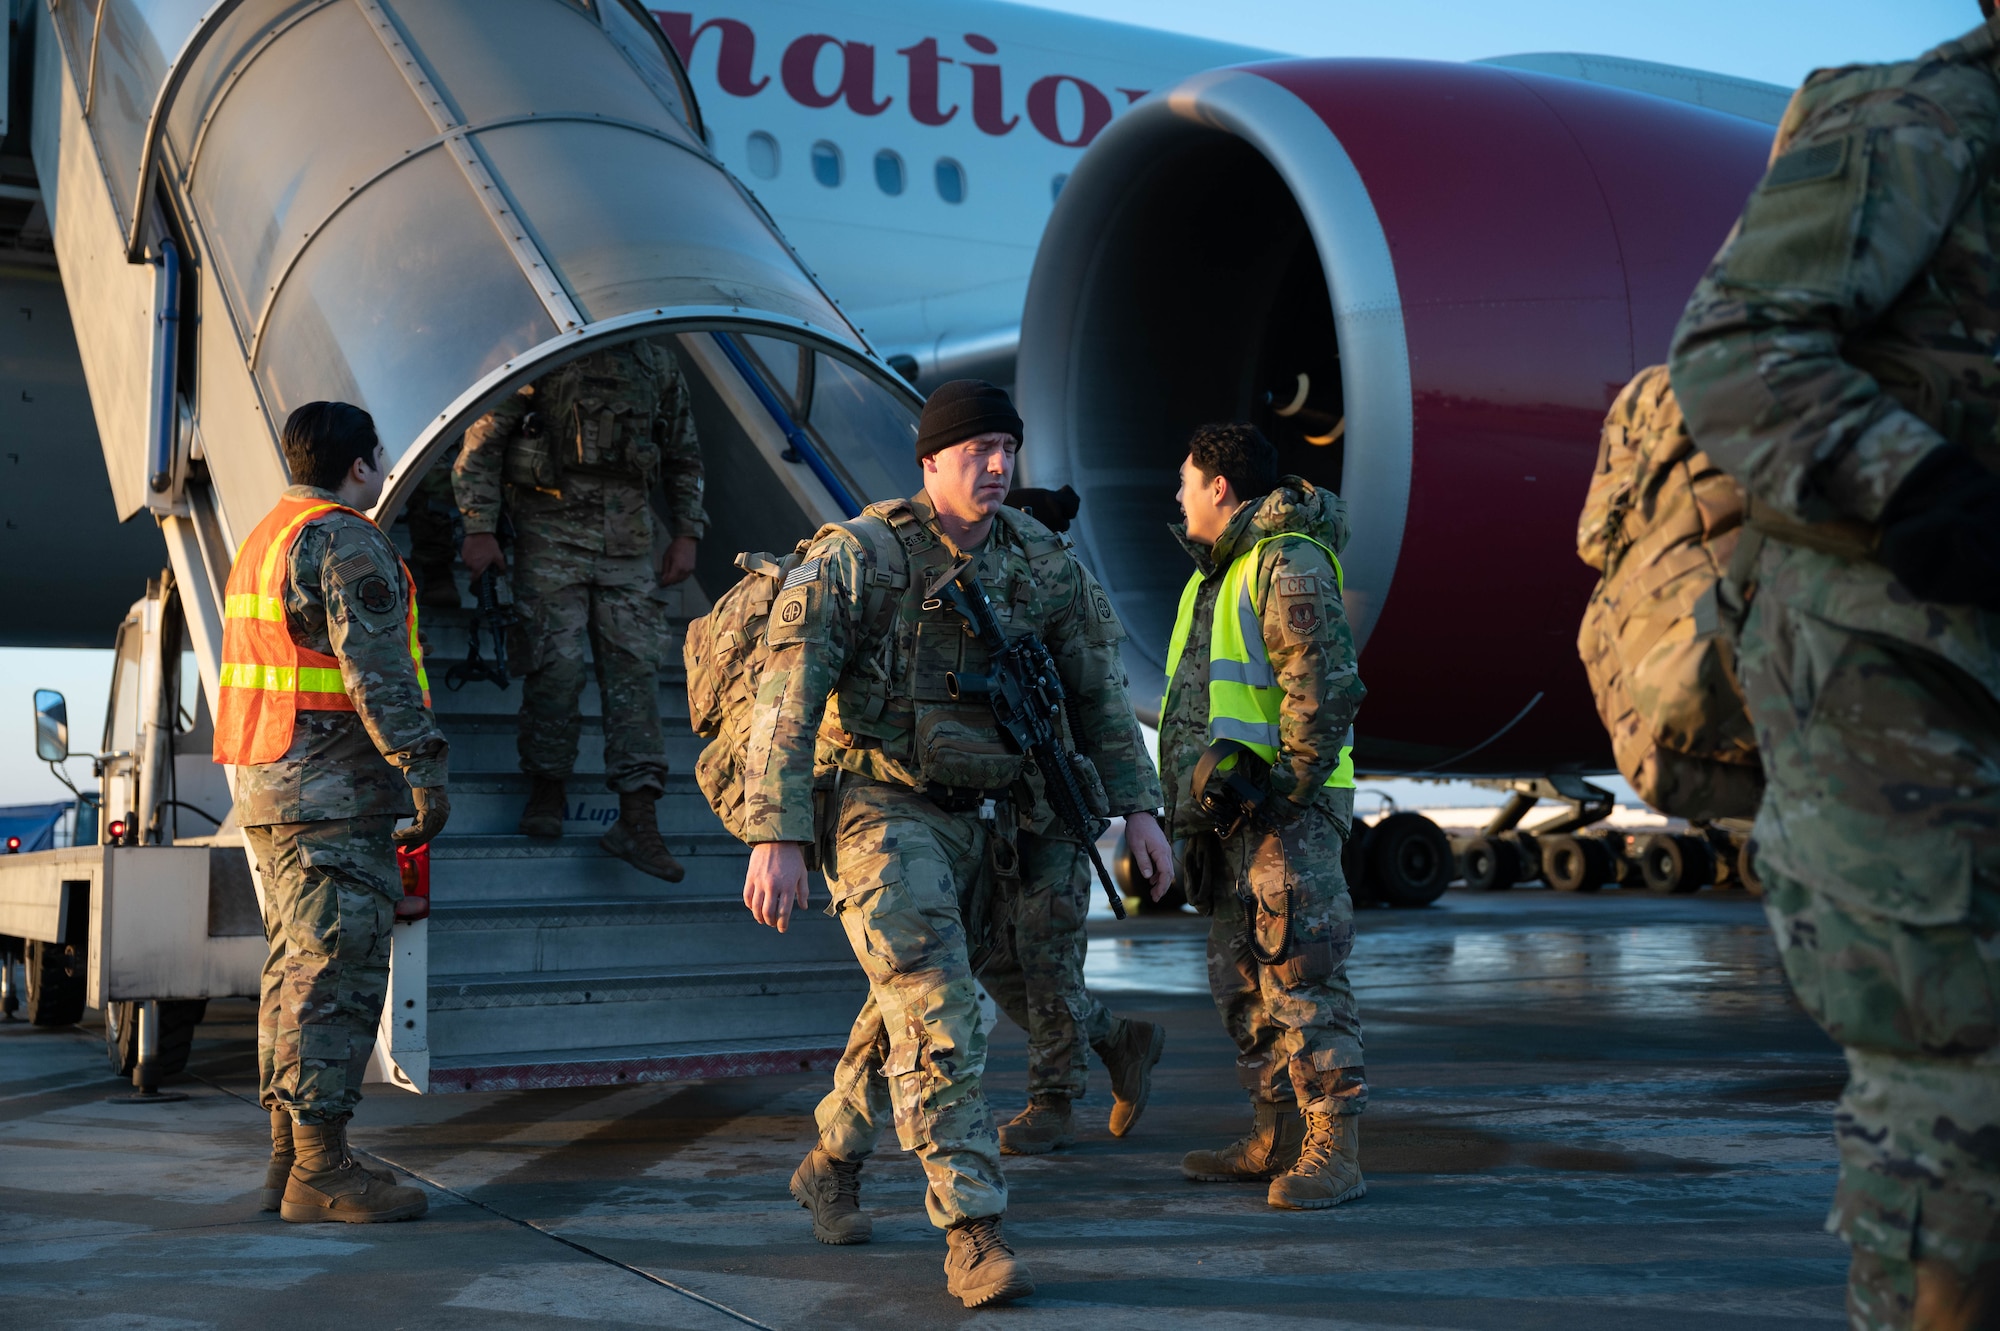 Soldiers depart a Boeing 777 commercial aircraft.